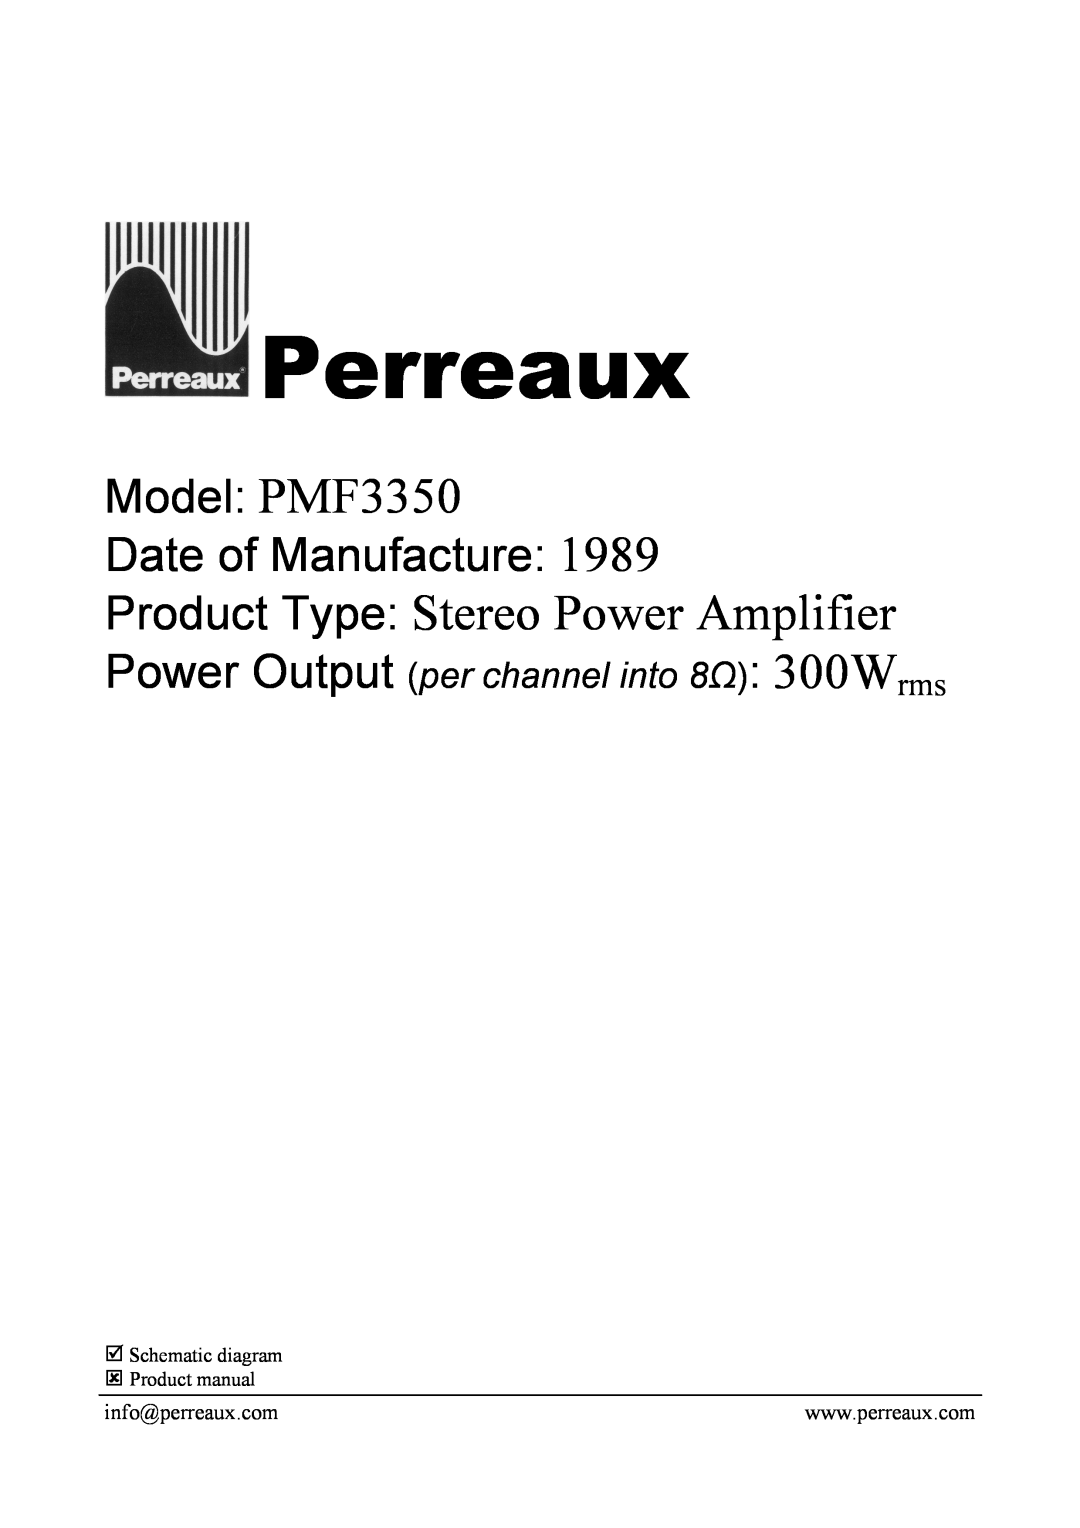 Perreaux manual Perreaux, Product Type Stereo Power Amplifier, Model PMF3350 Date of Manufacture 